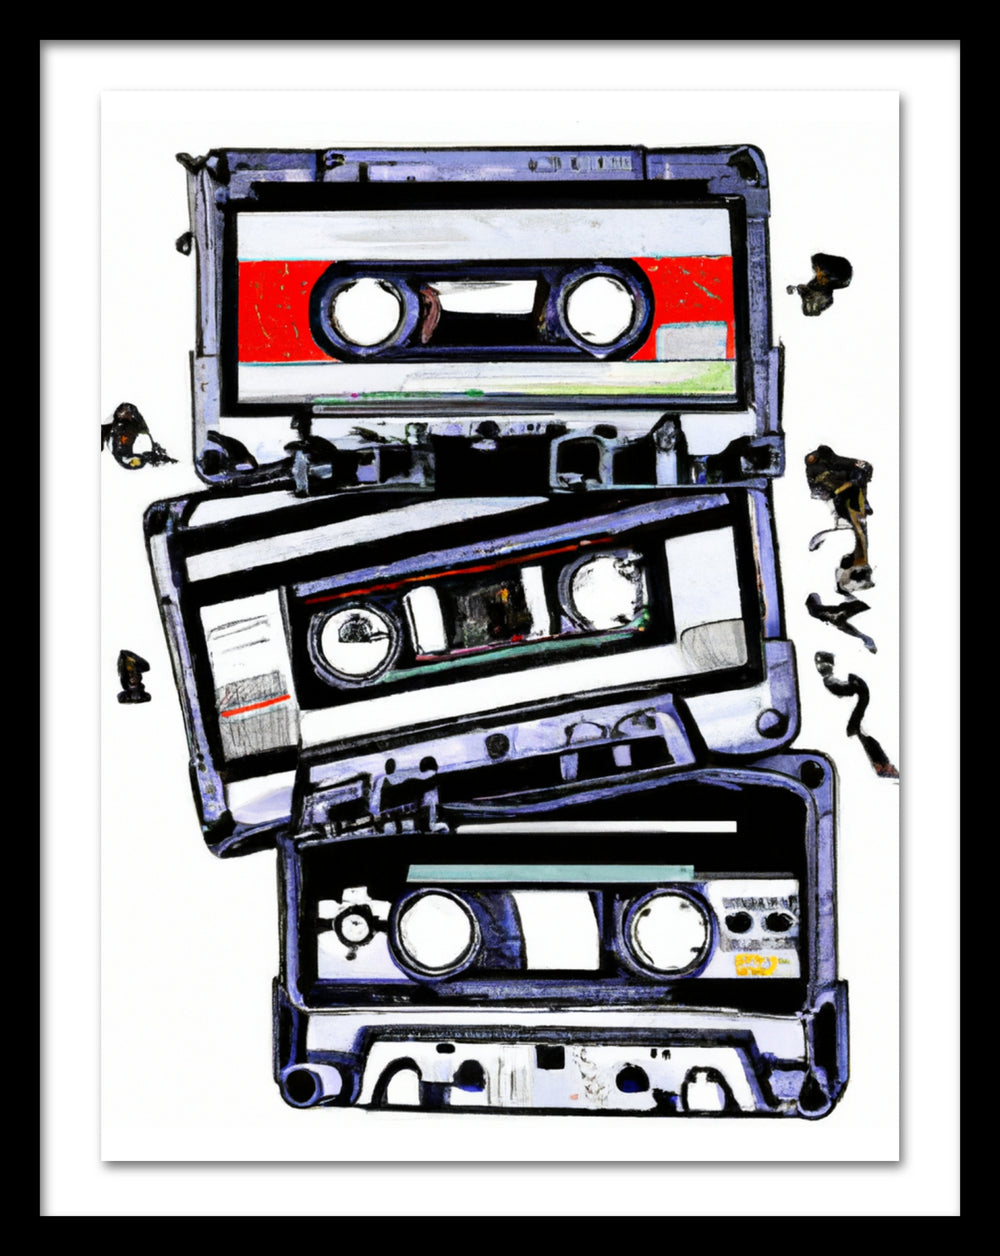 A poster that depicts three cassette tapes